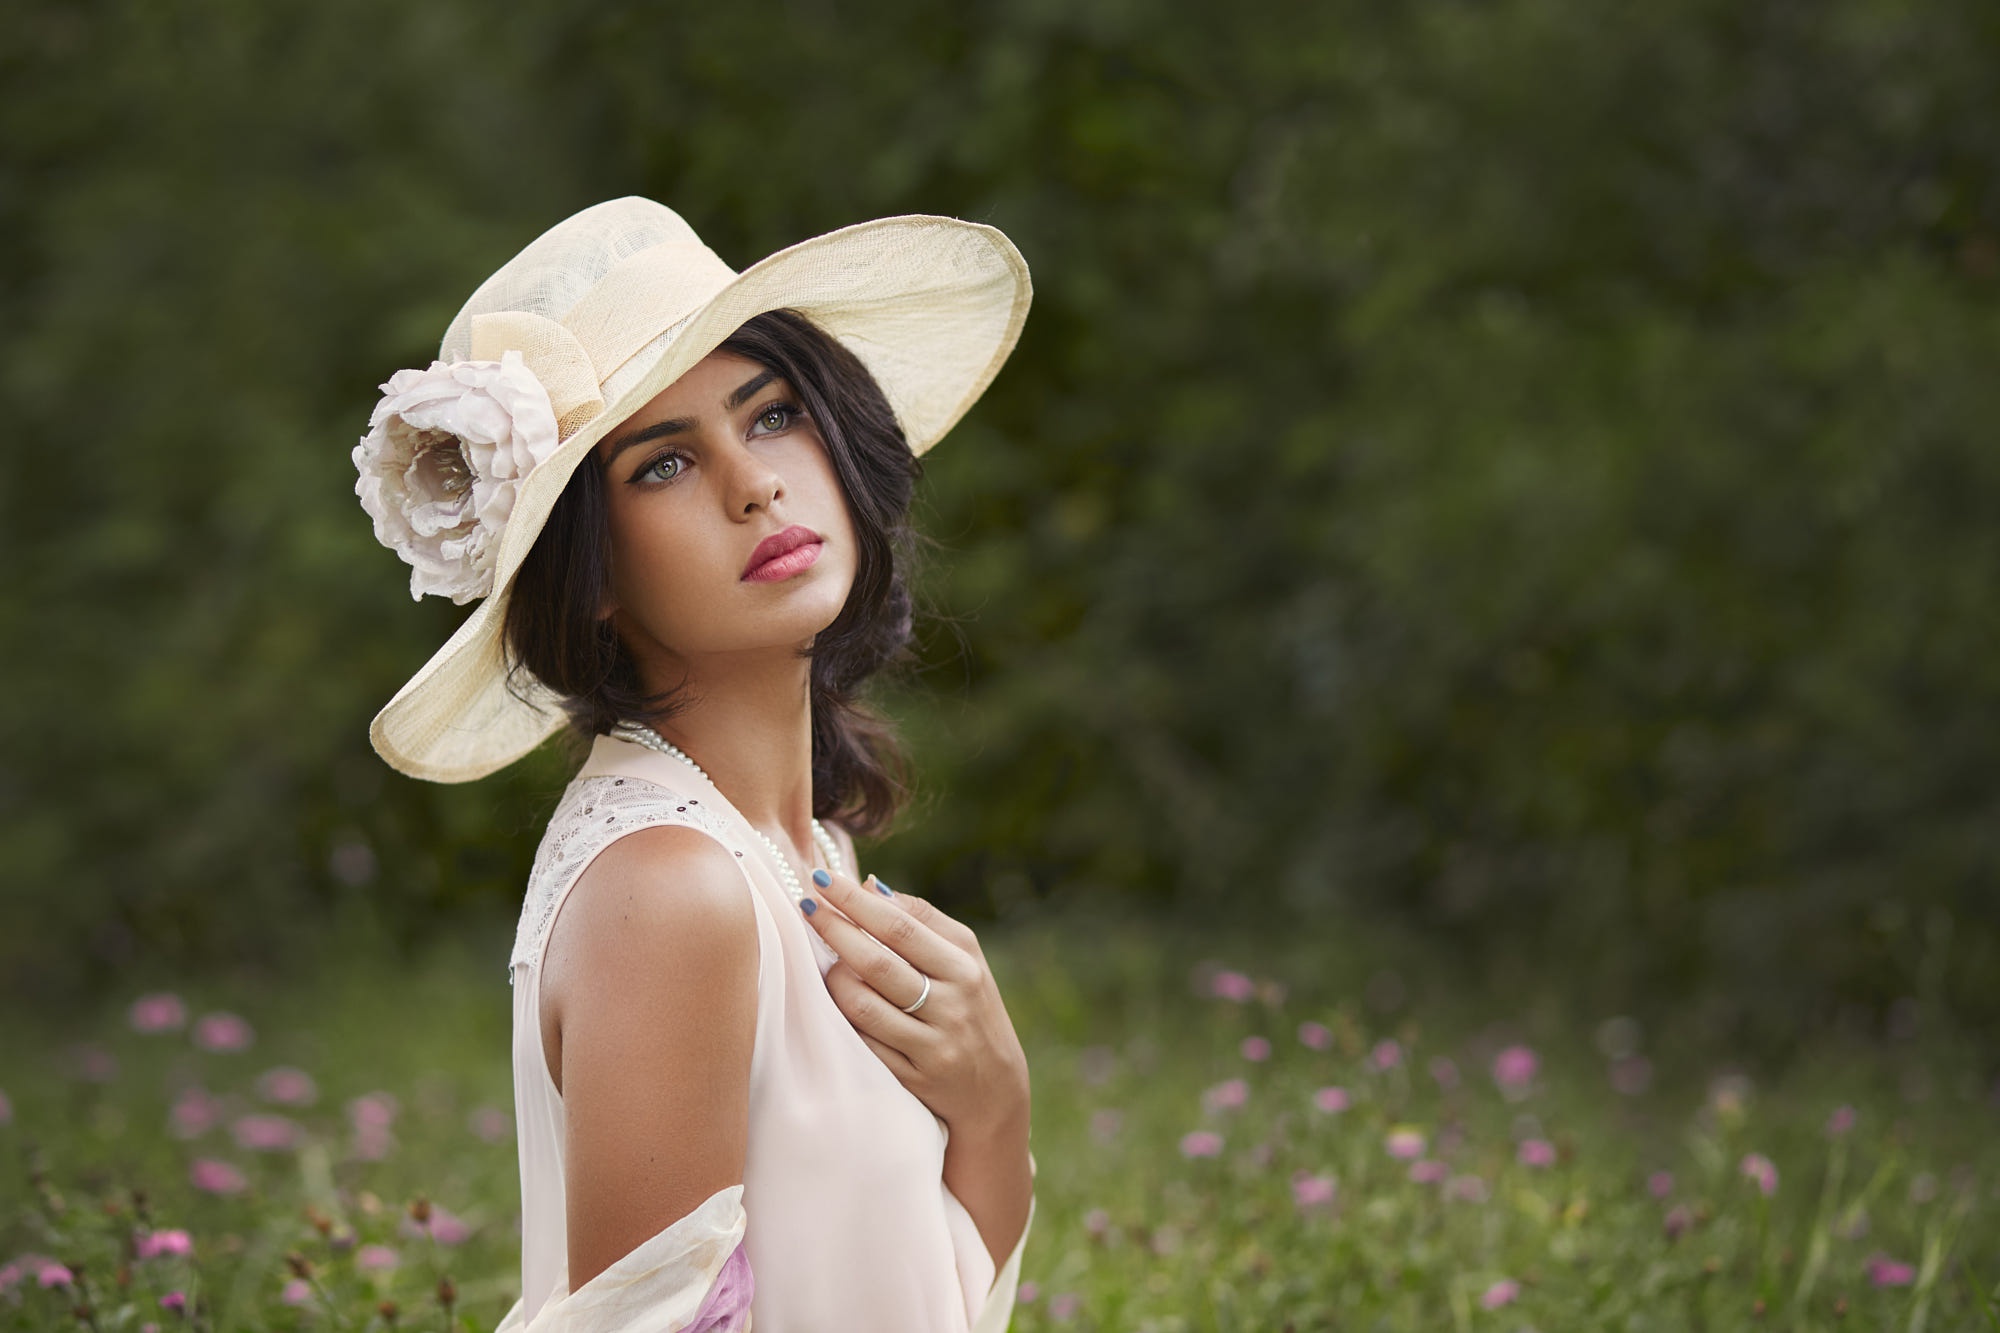 Model Red Lipstick Gray Eyes White Clothing Hat Necklace Painted Nails Short Hair Women Outdoors Wom 2000x1333